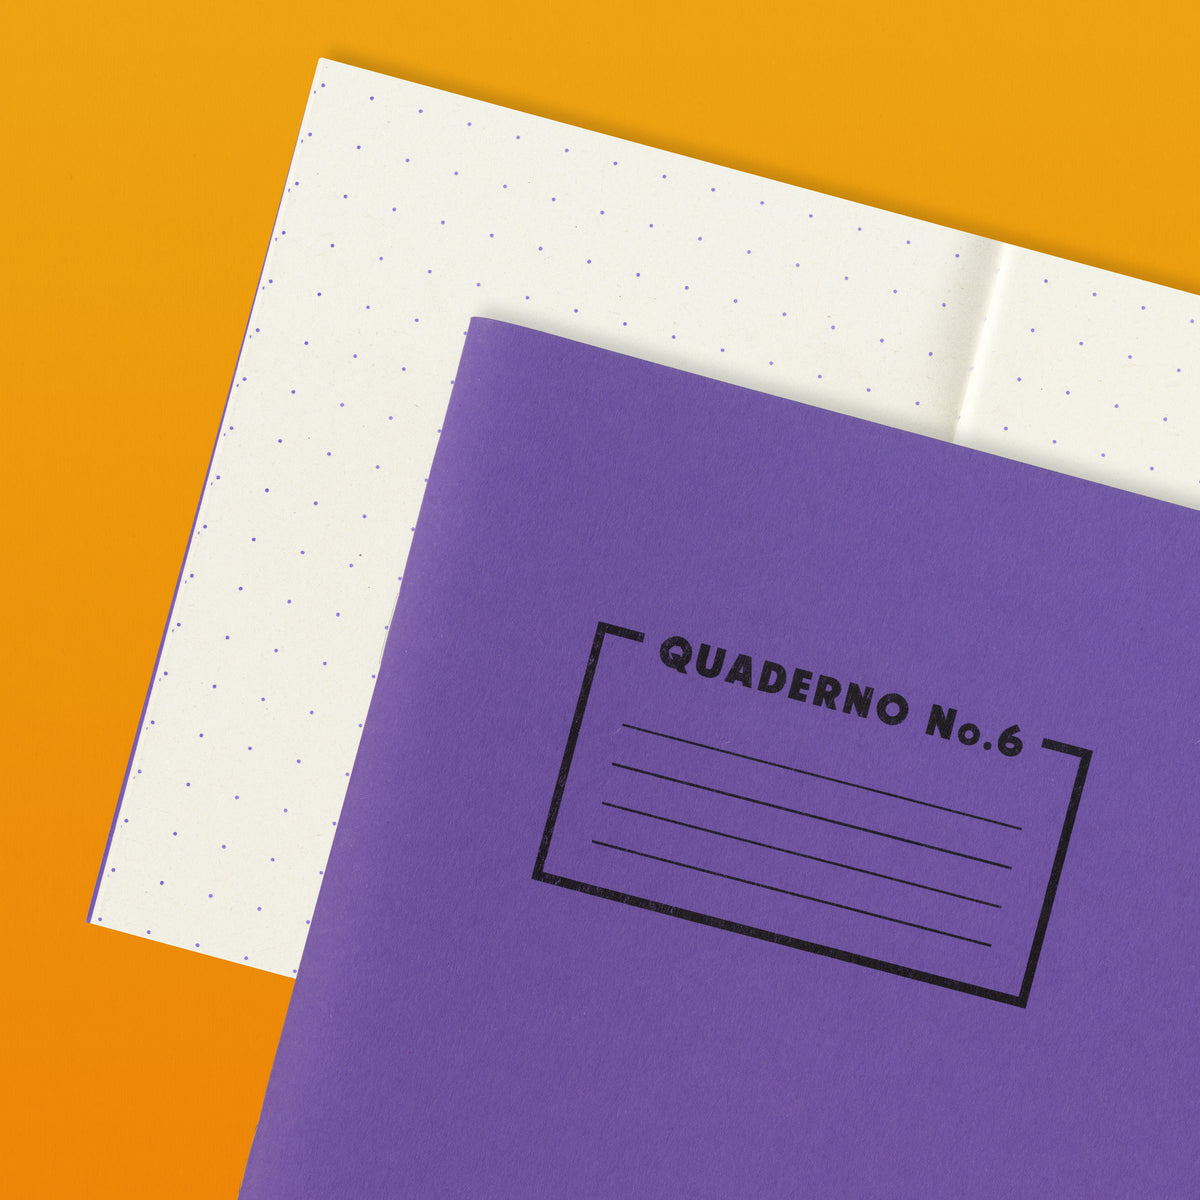 Quaderno No.6 - Dotted Grid Notebook